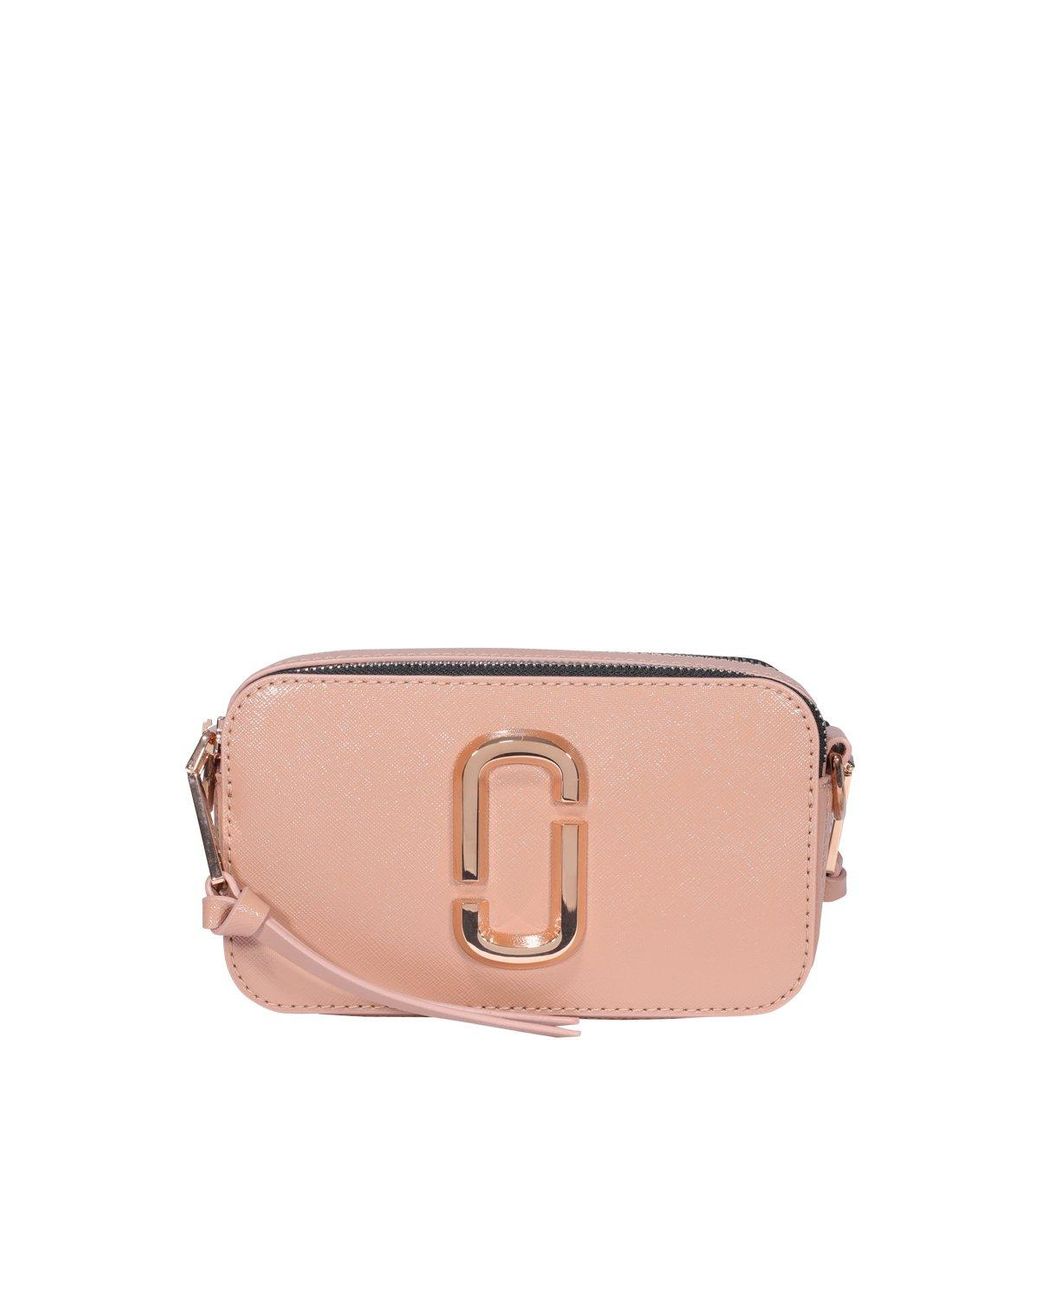 Marc Jacobs Leather The Snapshot Dtm Camera Bag in Pink - Lyst